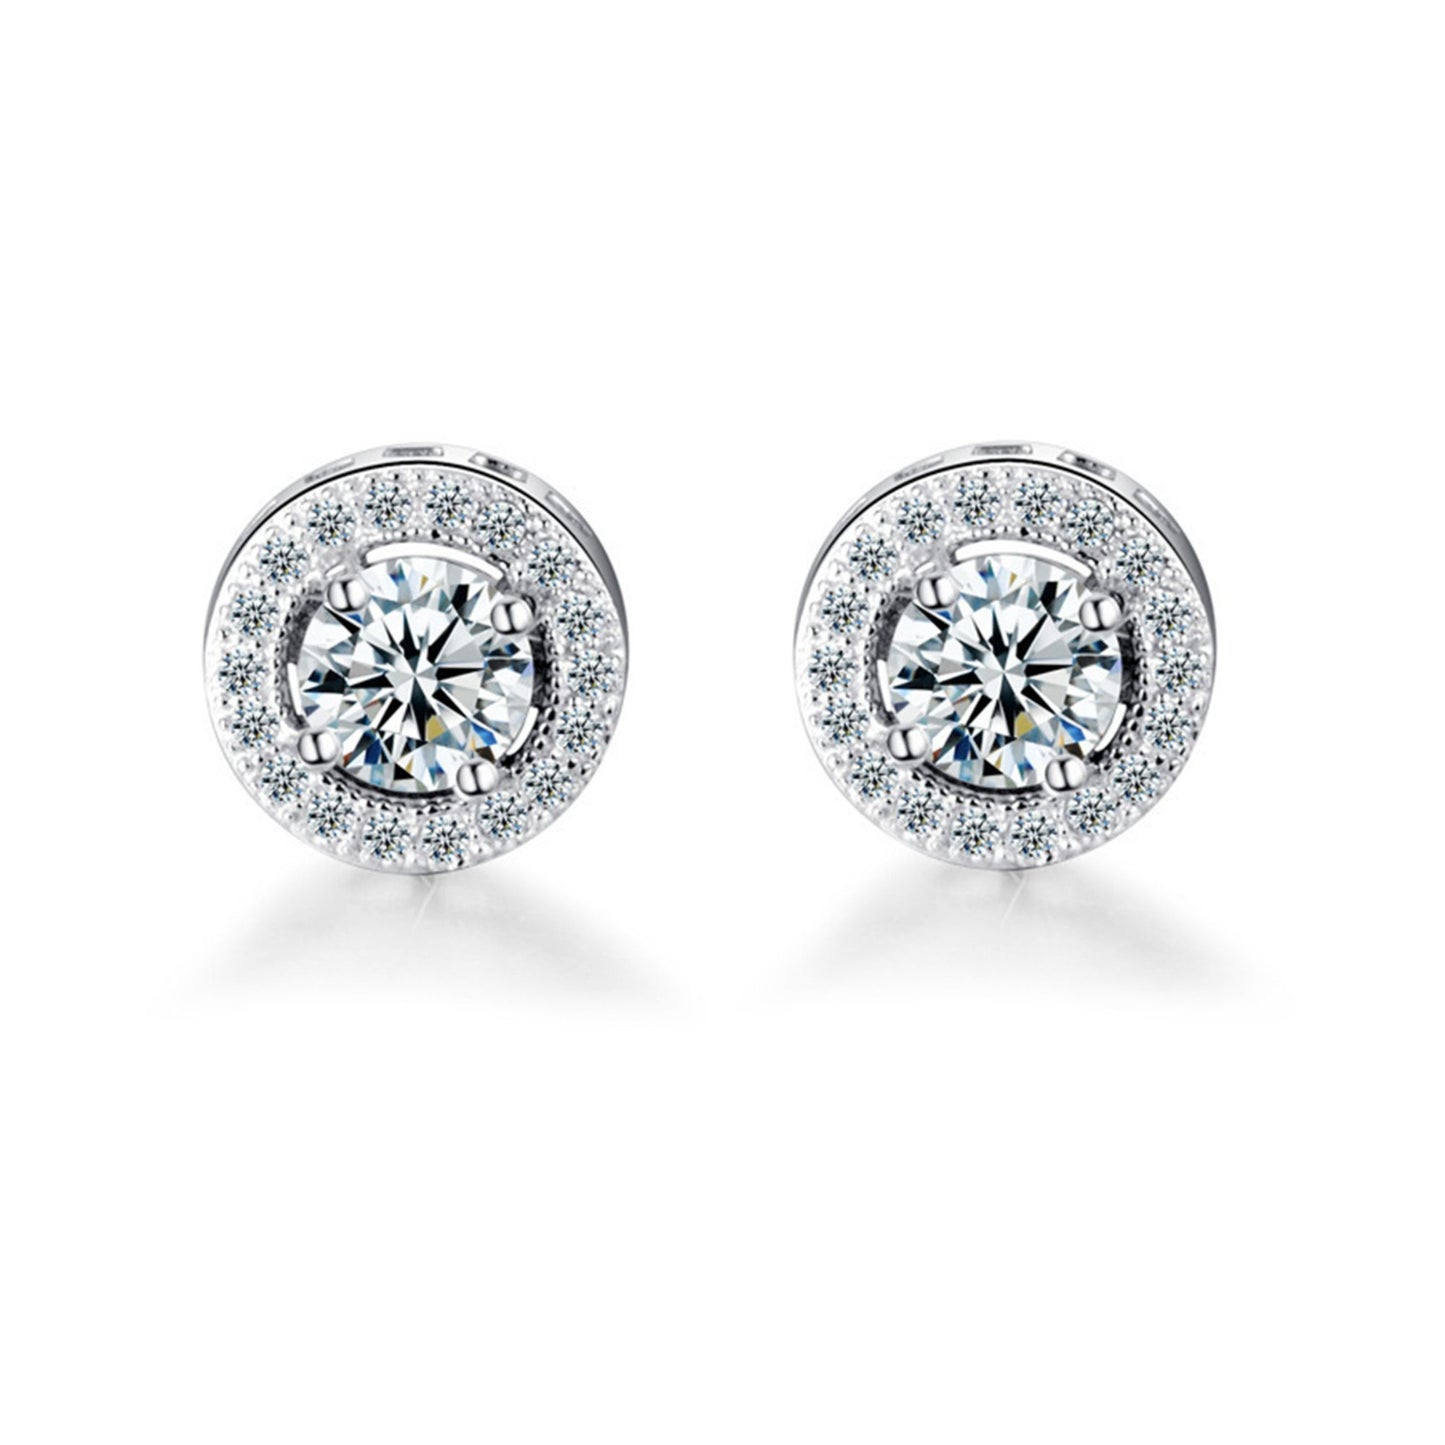 Sterling Silver 10mm Halo Round Stud Earrings with Sparkling Cubic Zirconia